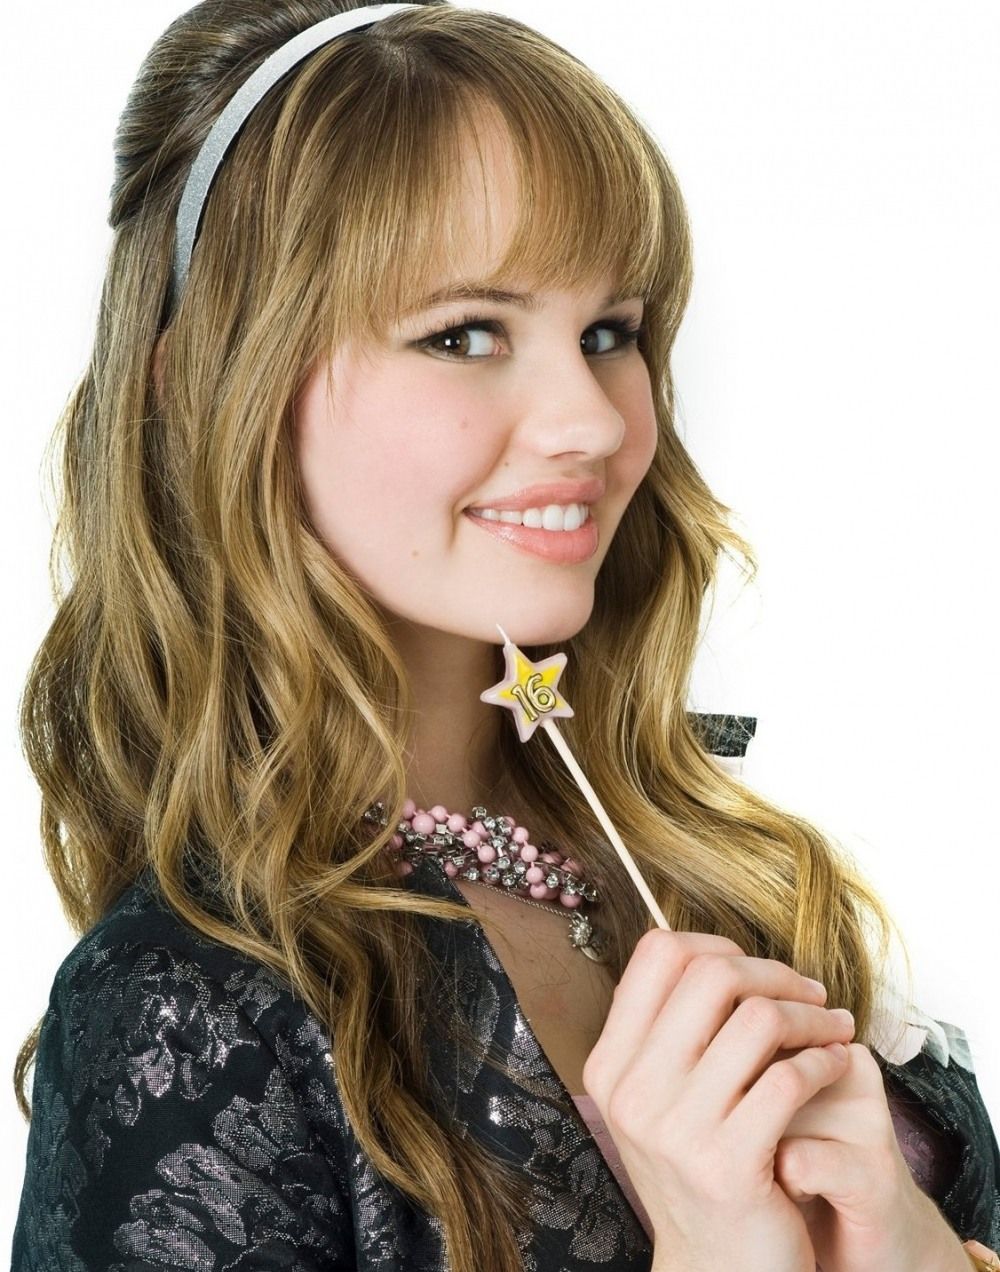 16 Wishes. 